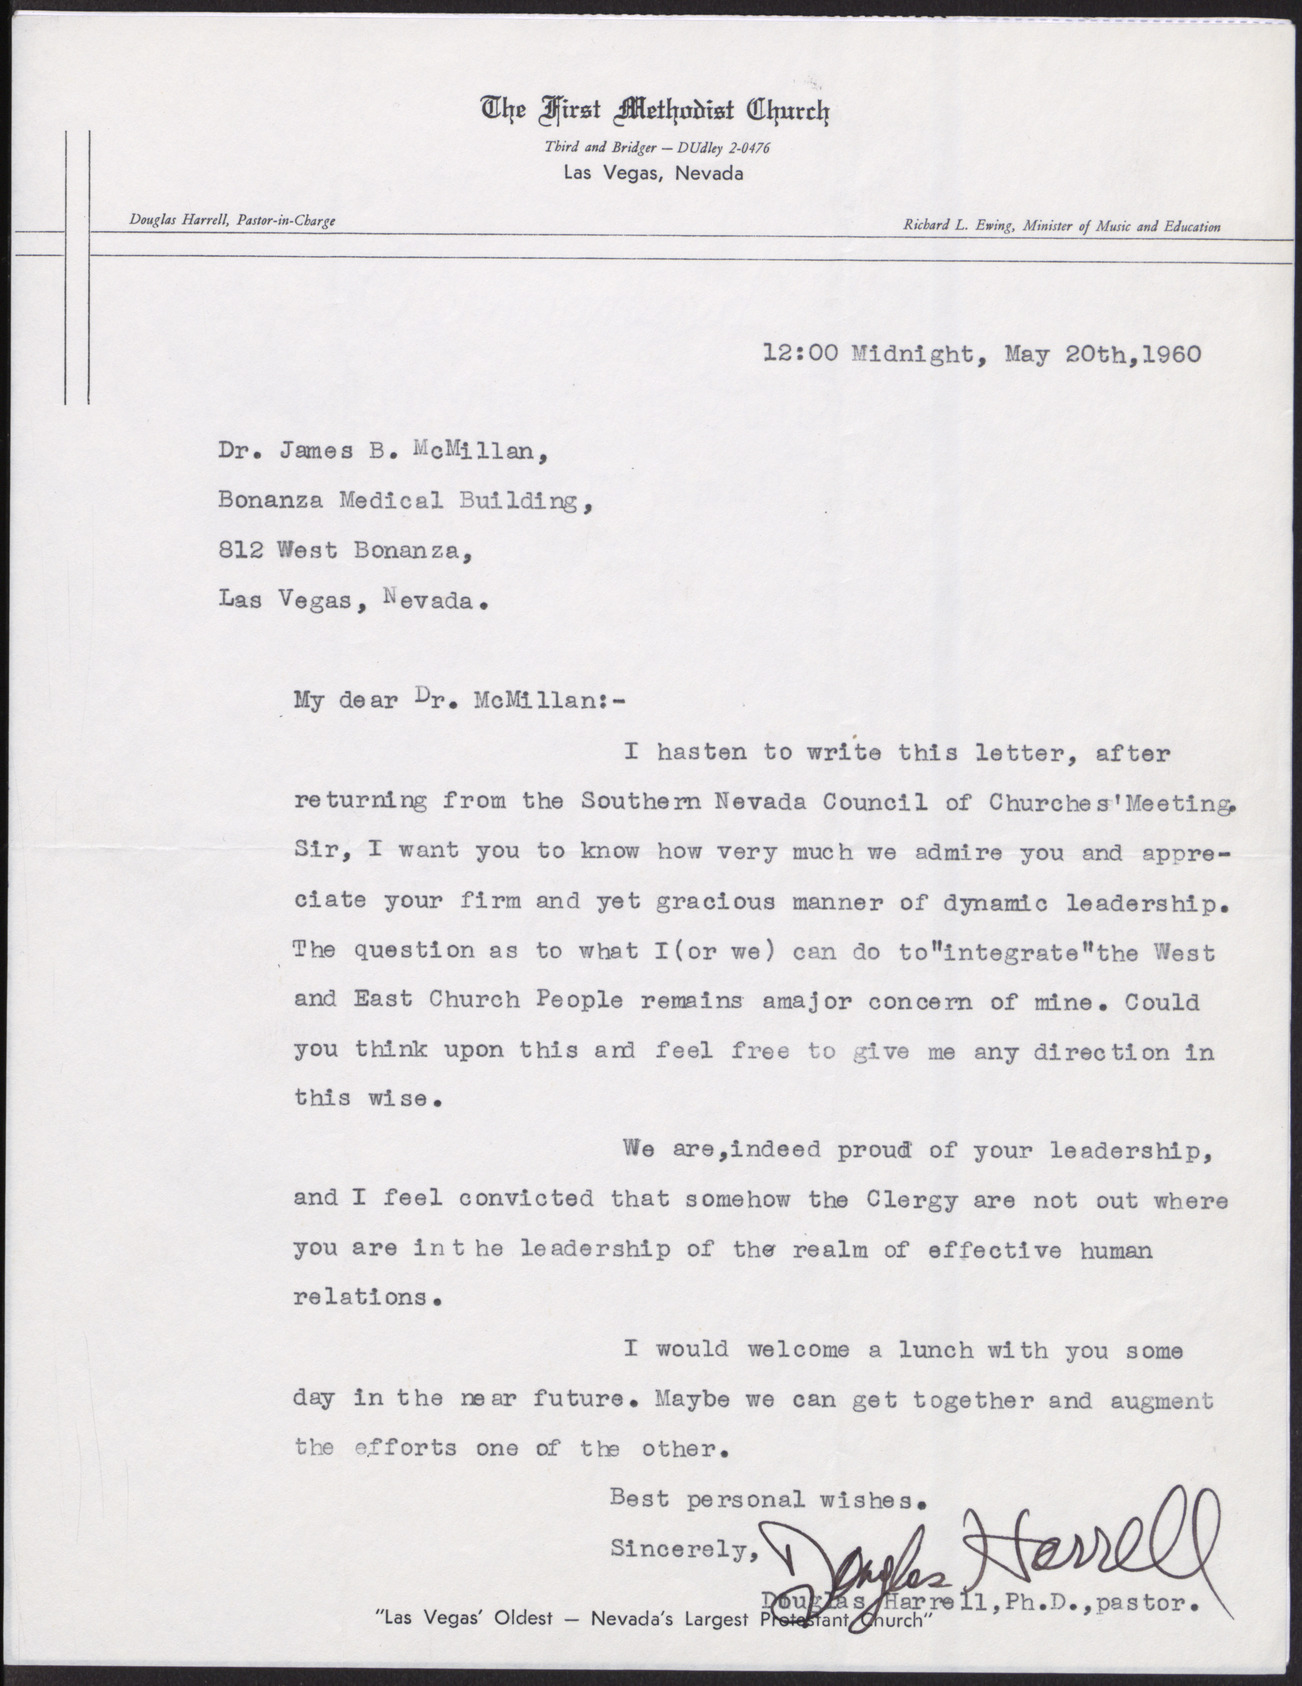 Letter to Dr. James B. McMillan from Douglas Harrell, May 20, 1960